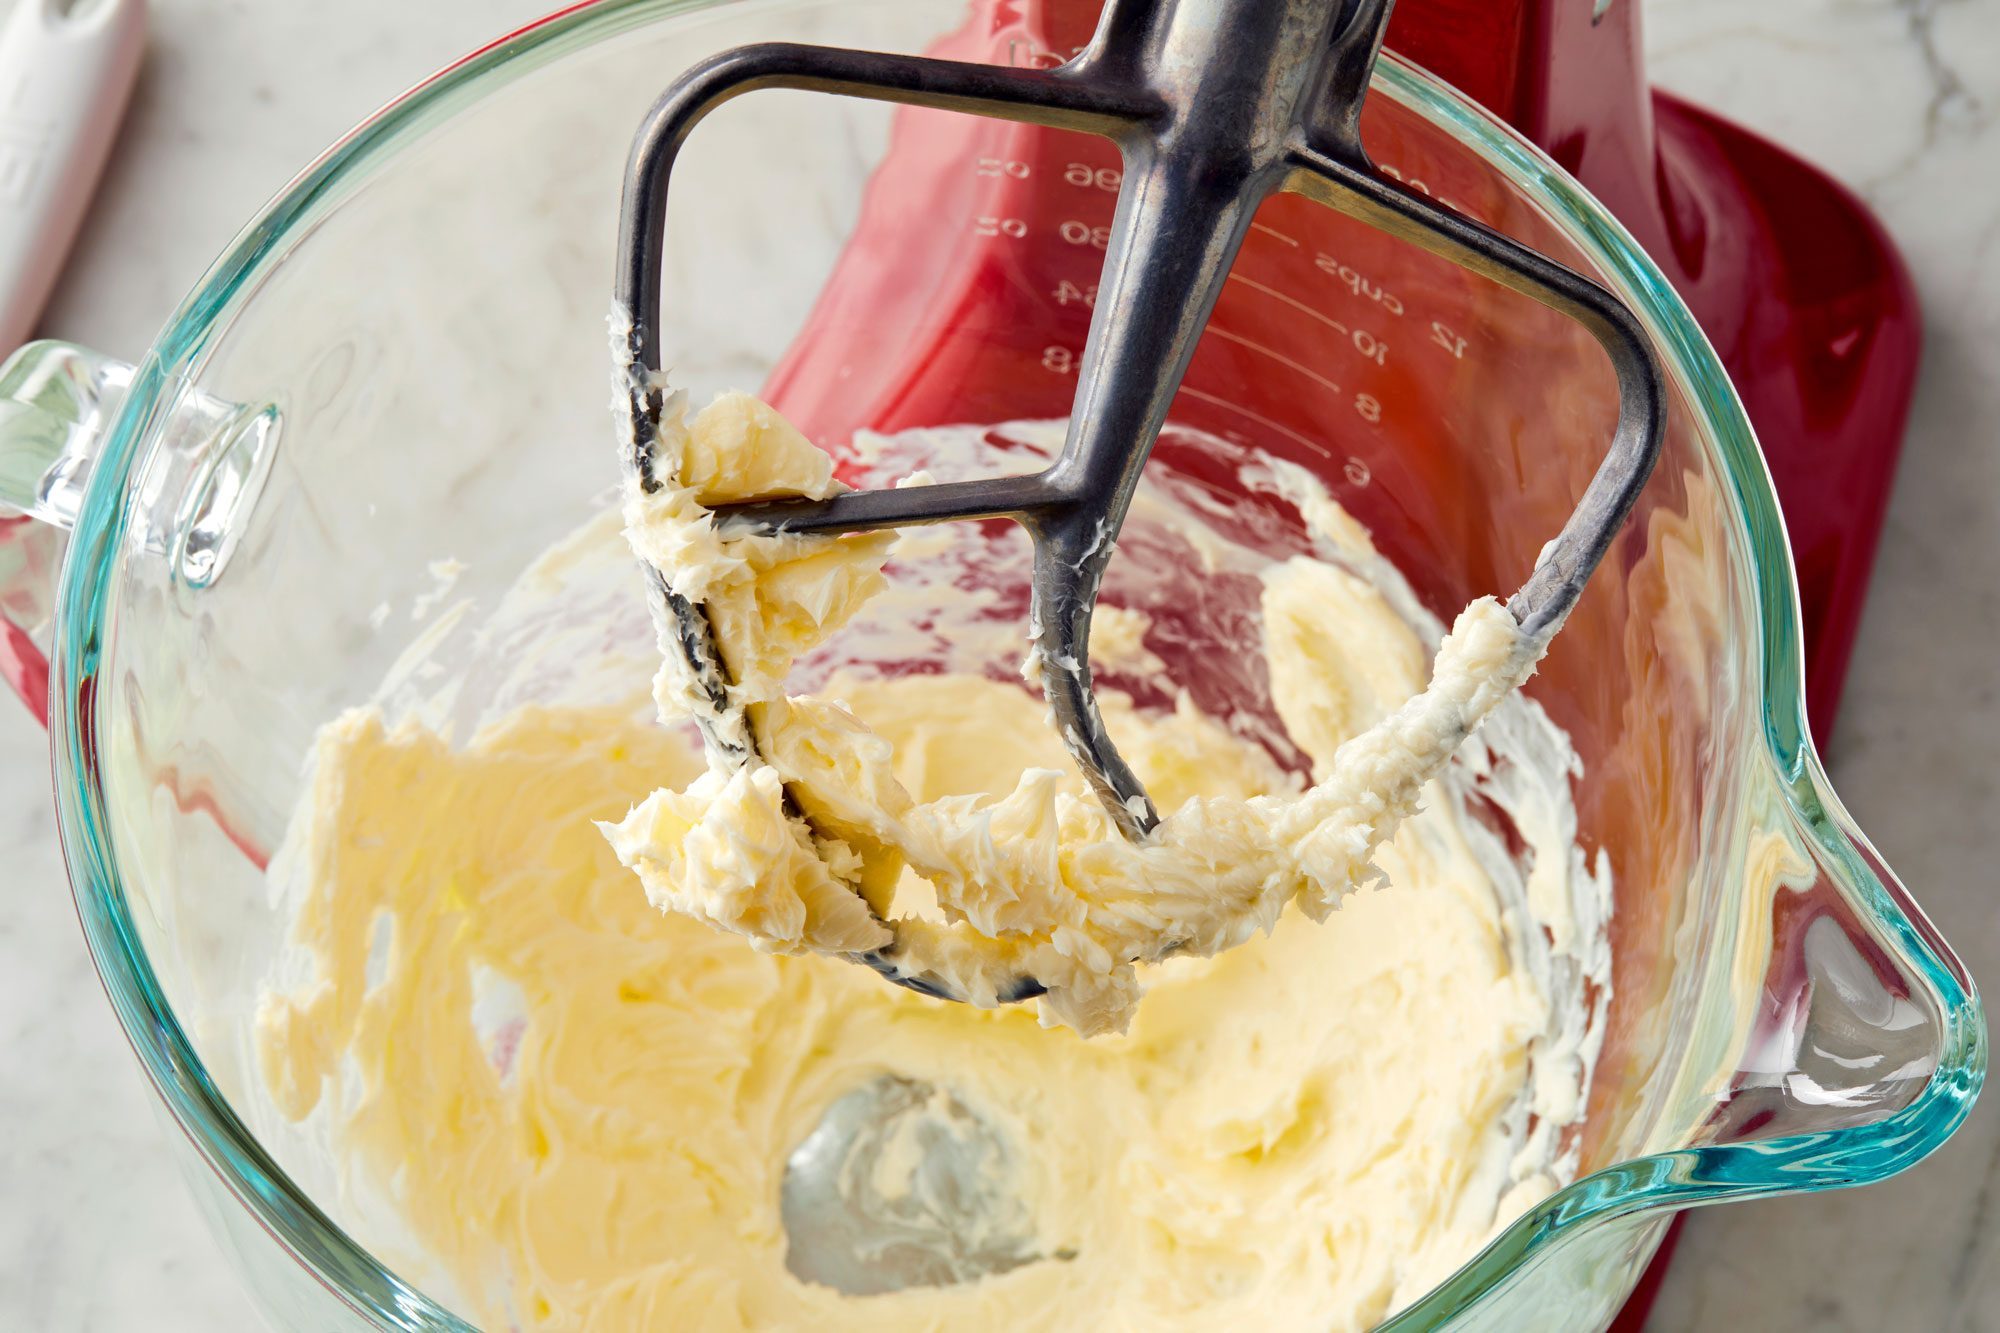 In another bowl, whisk flour, baking soda, cream of tartar, nutmeg and salt; gradually beat into creamed mixture.